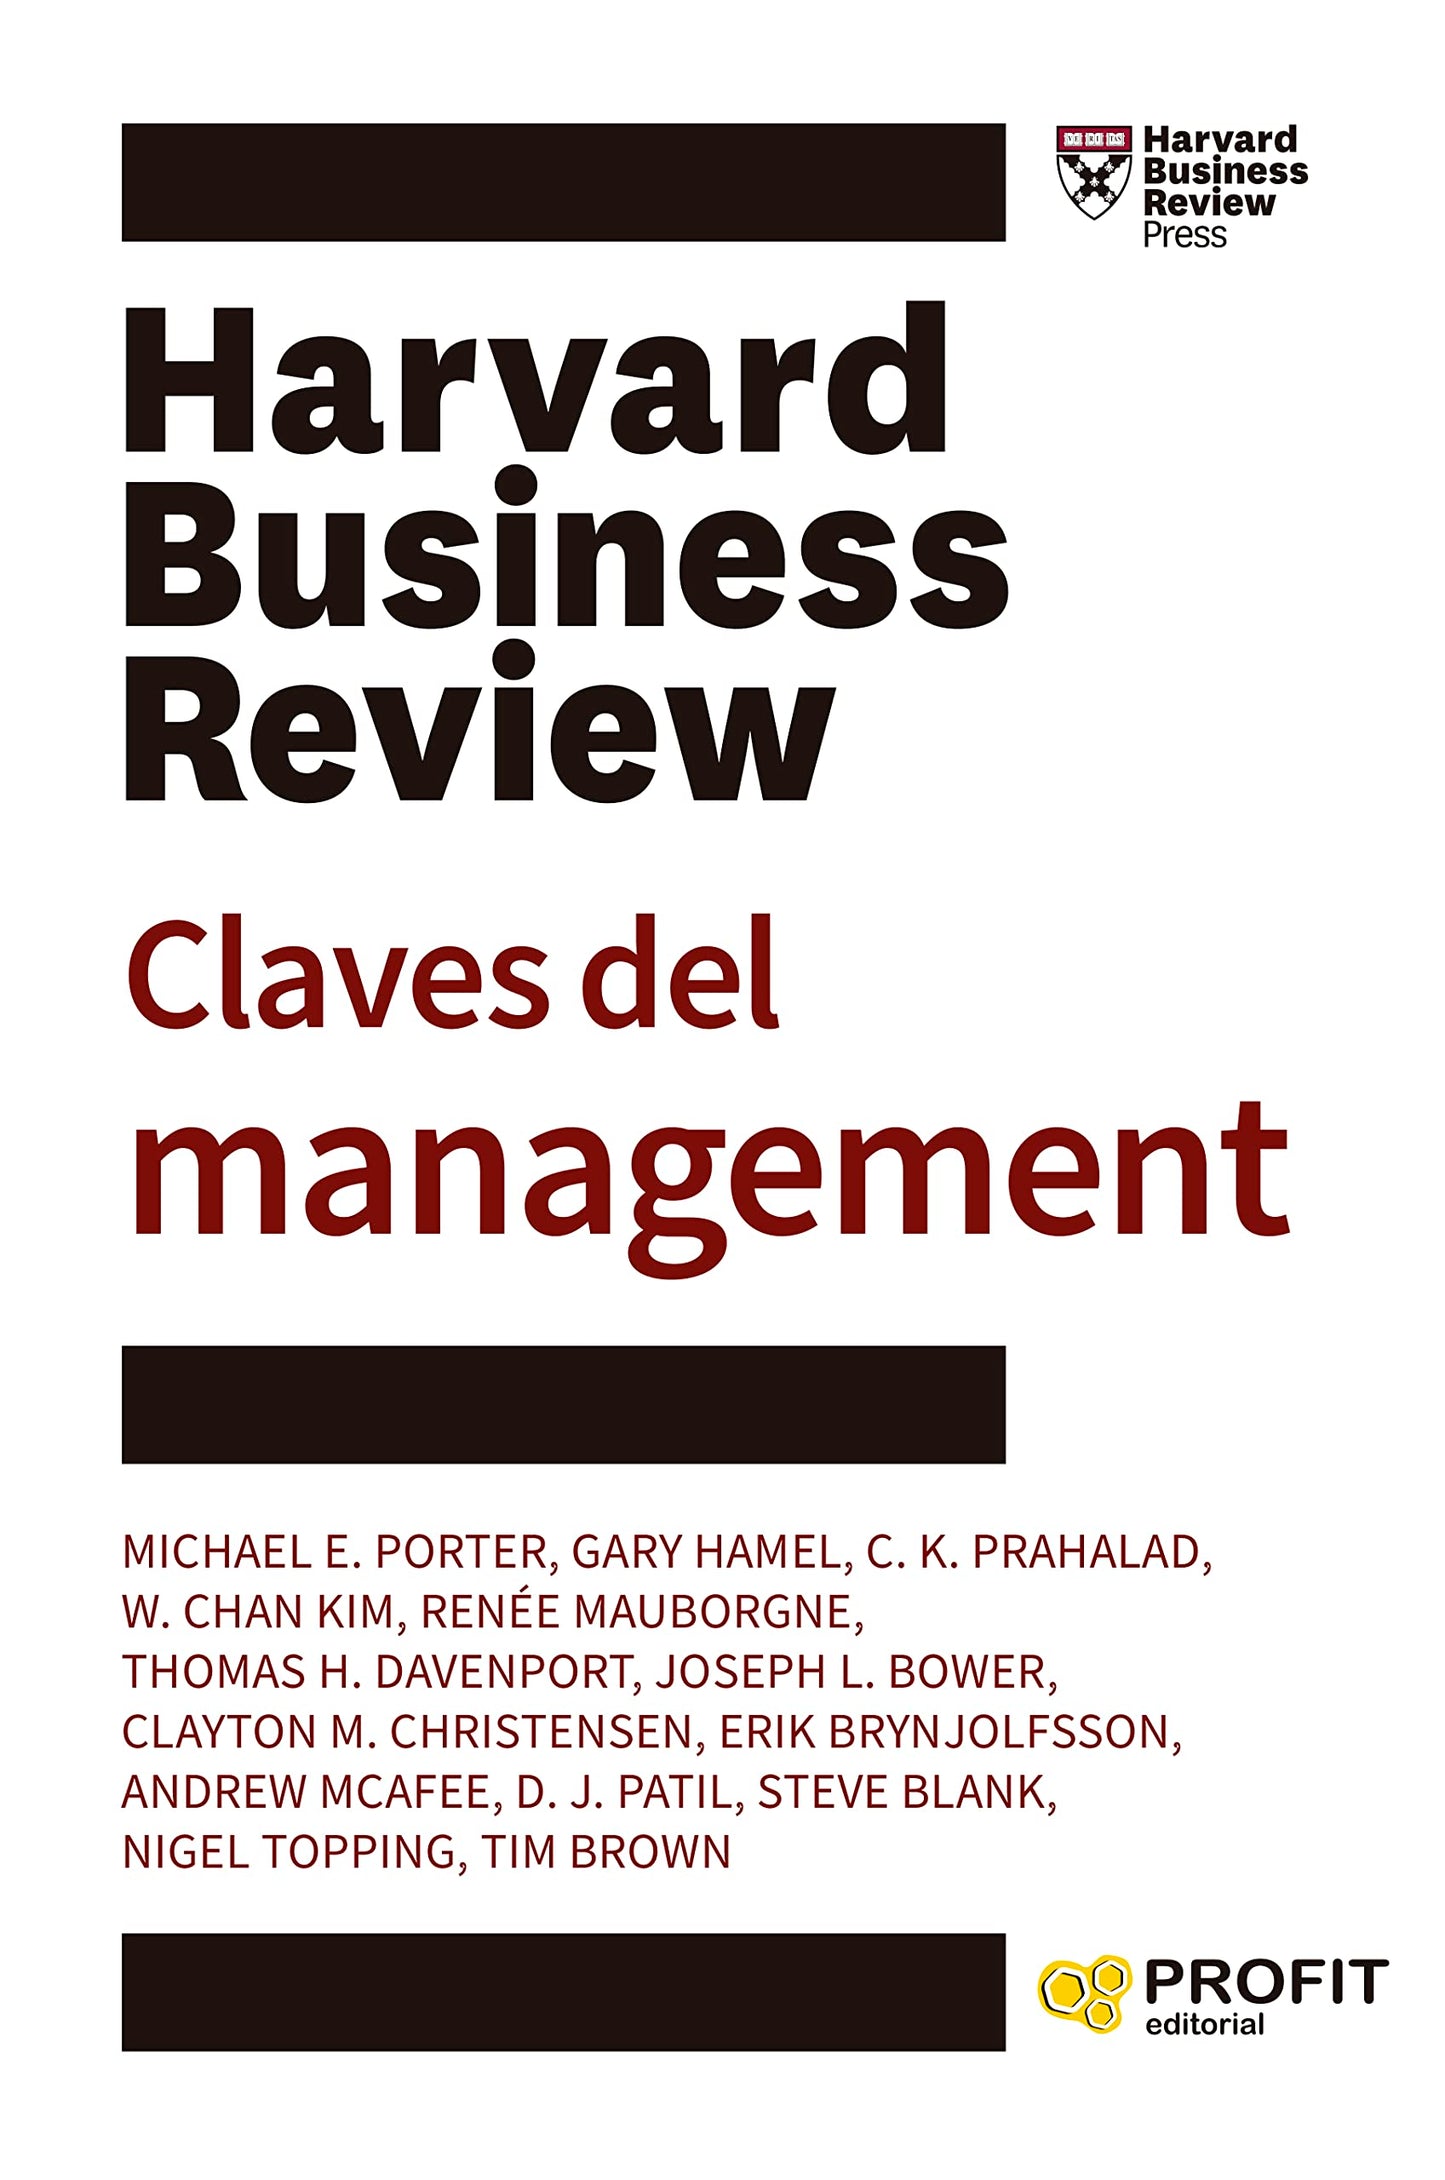 CLAVES DEL MANAGEMENT HARVARD BUSINESS REVIEW